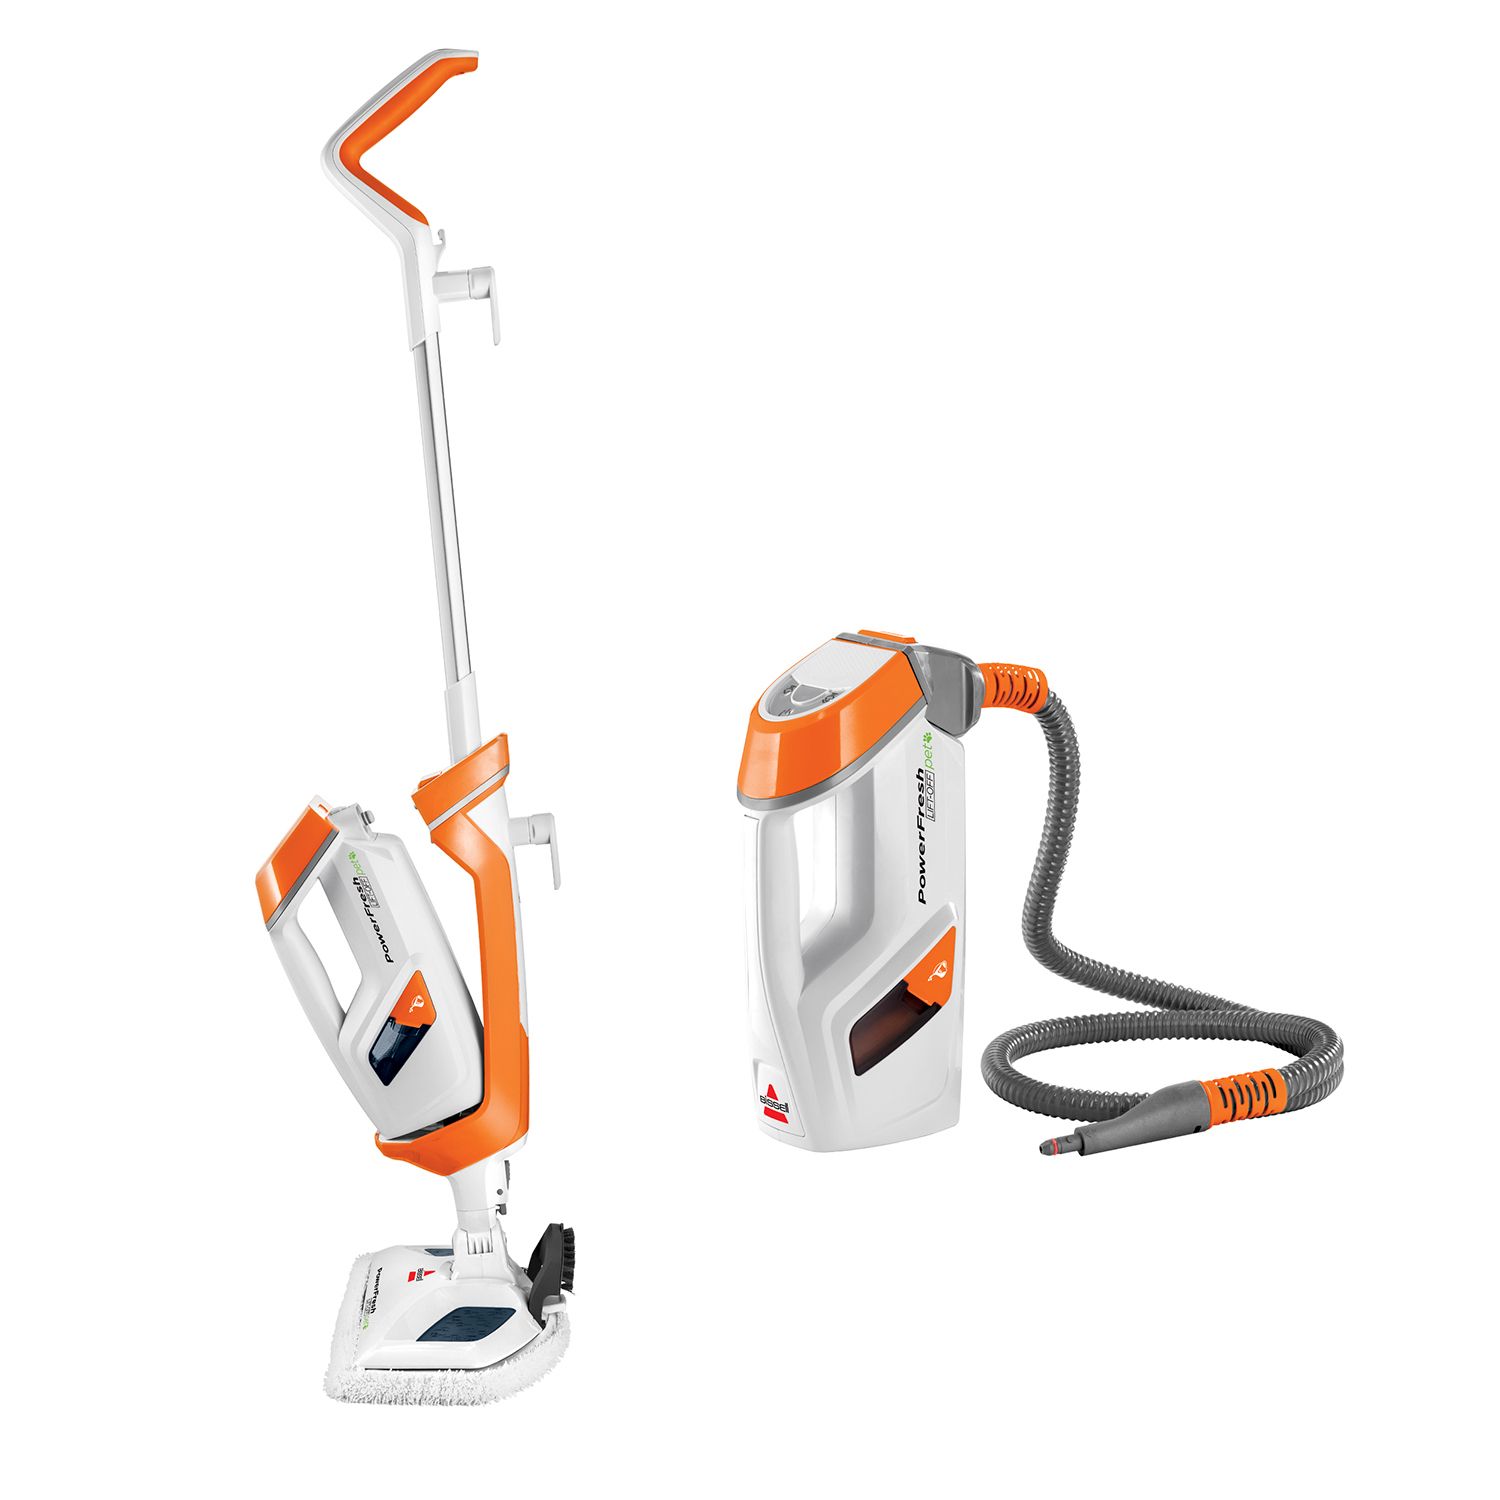 1100W Handheld Detachable Steam Mop with LED Headlights | Costway